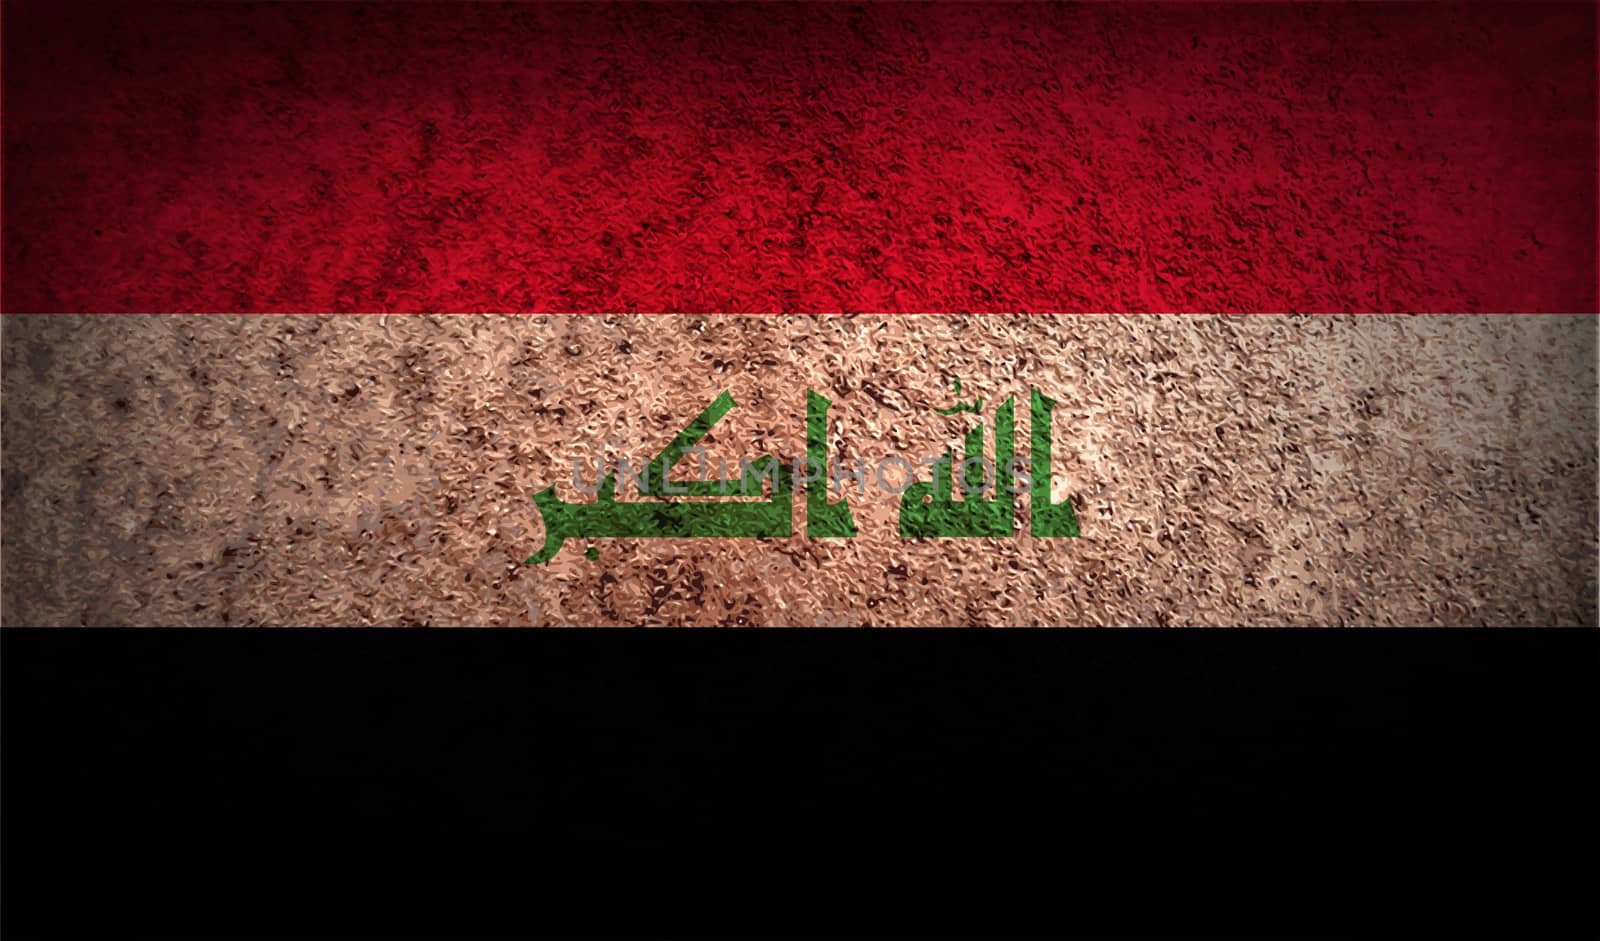 Flag of Iraq with old texture.  illustration